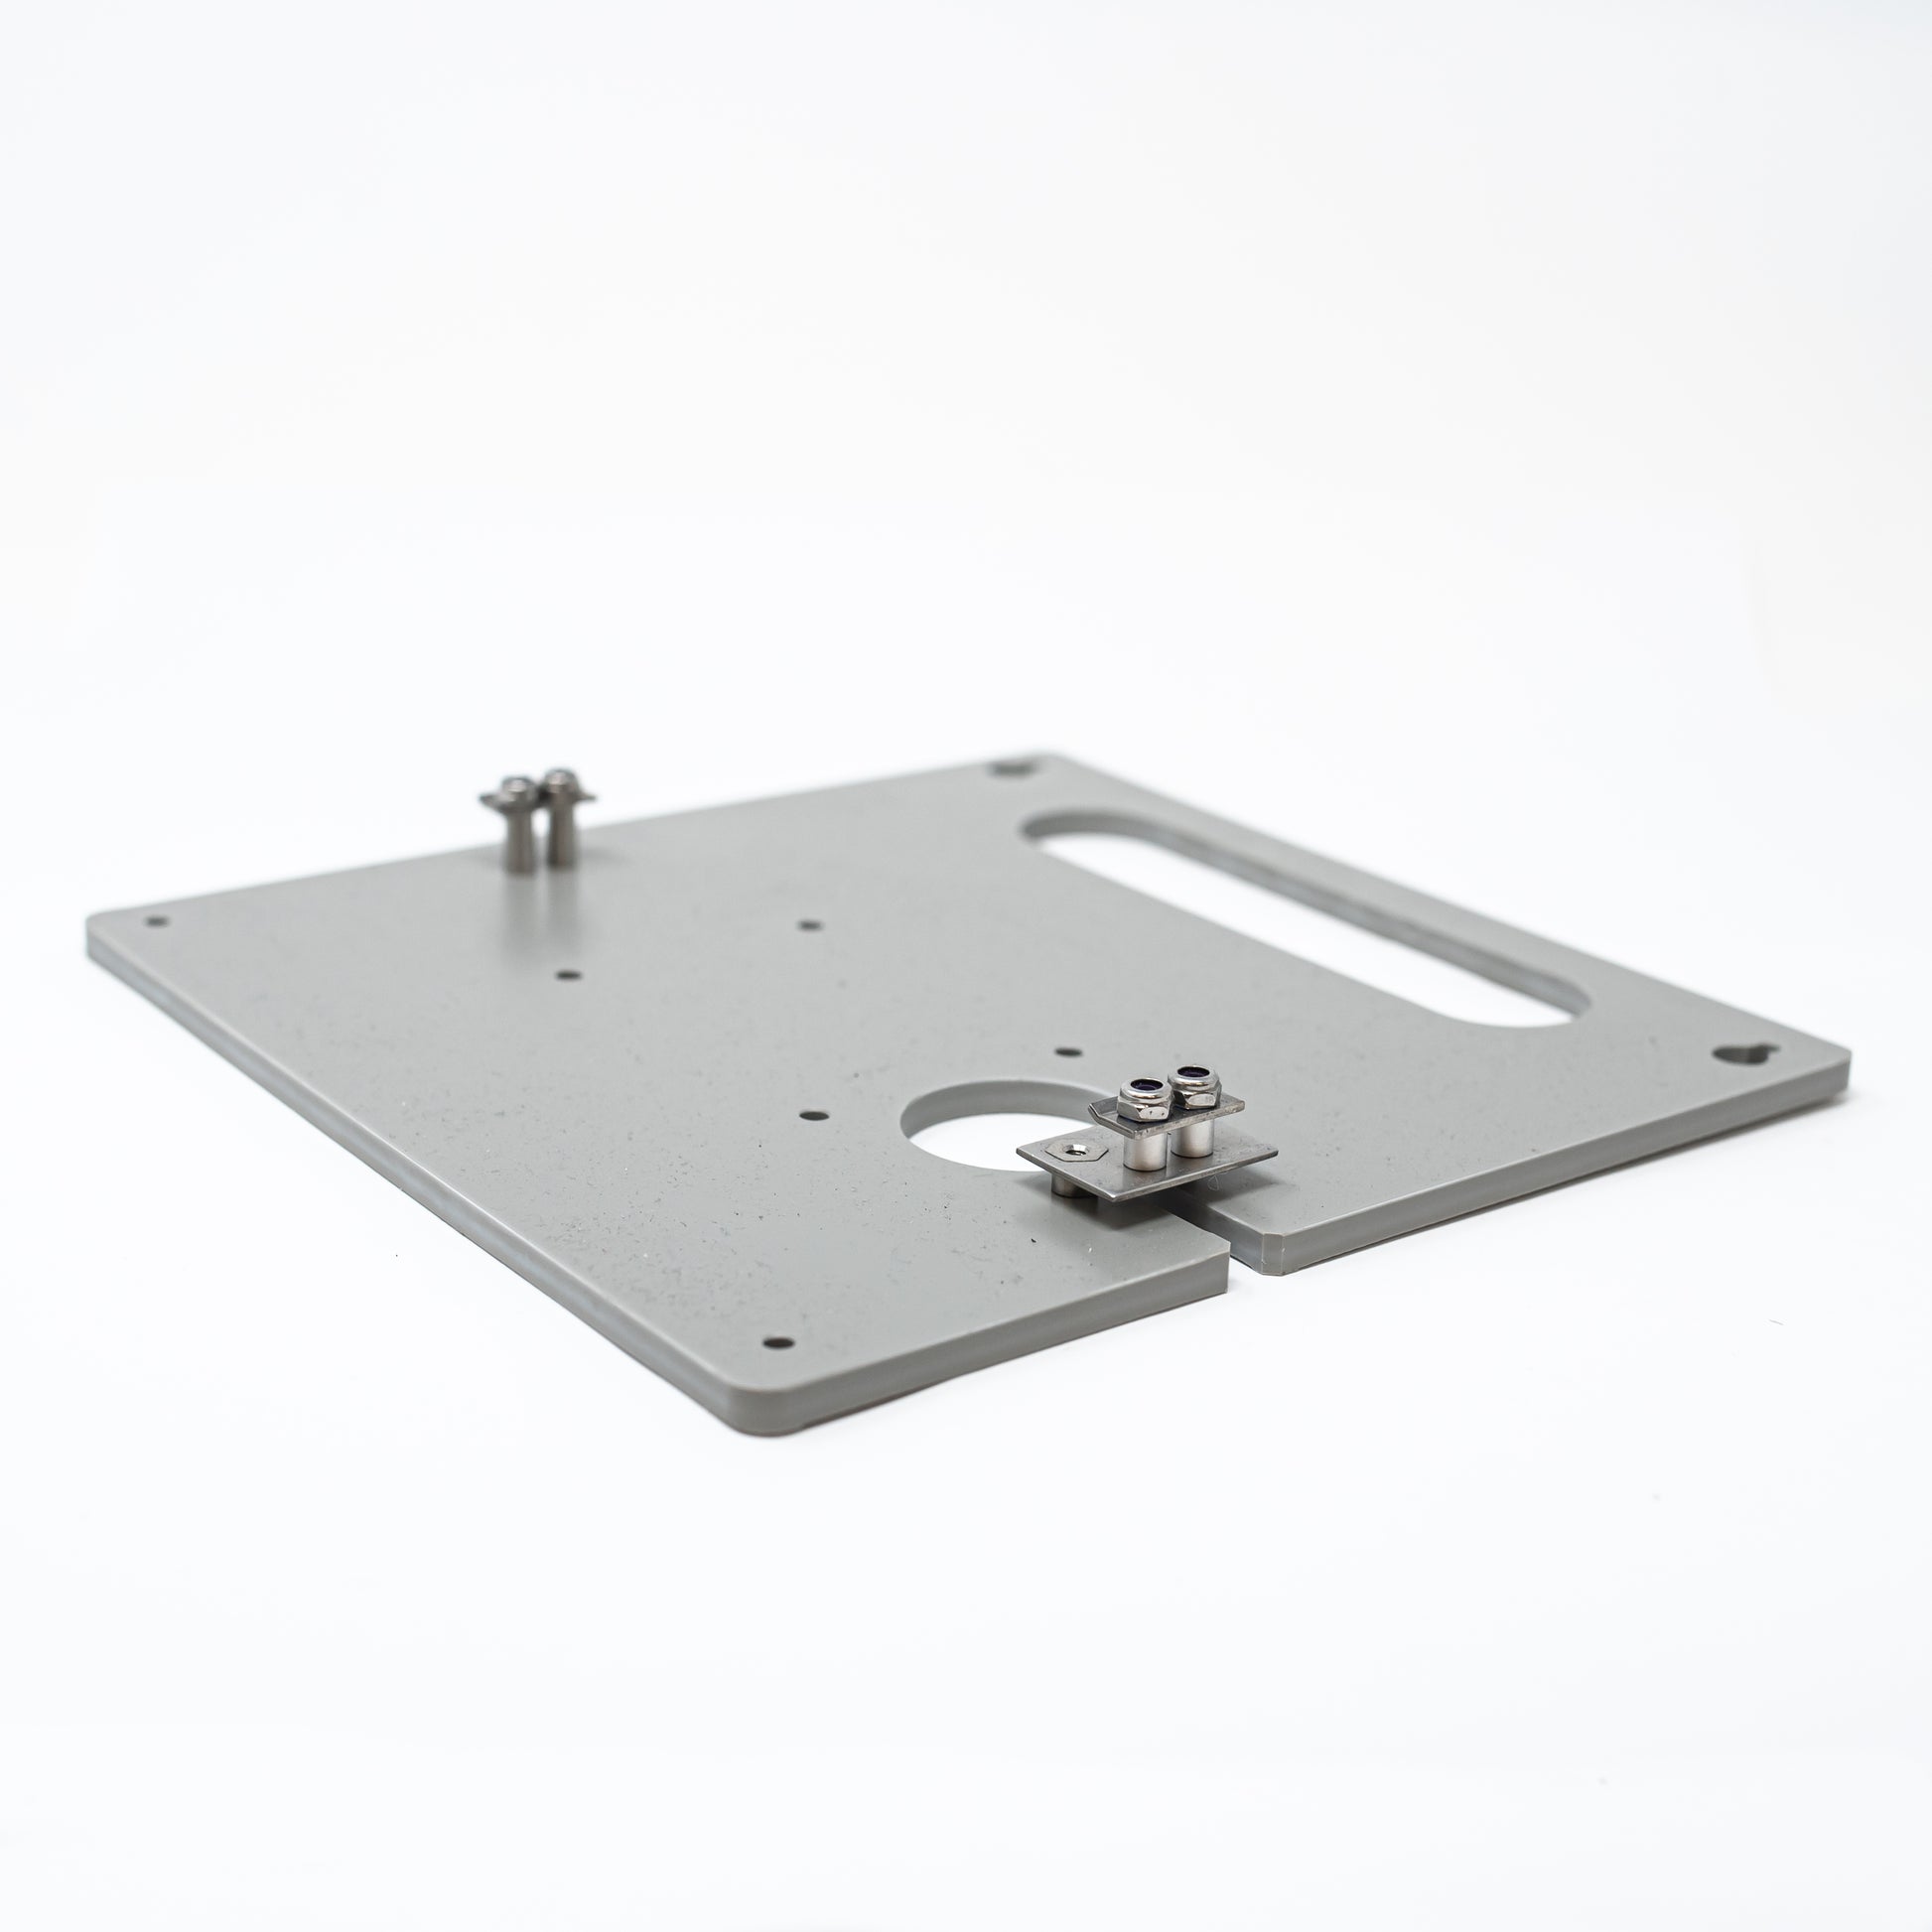 Plastic mounting plate